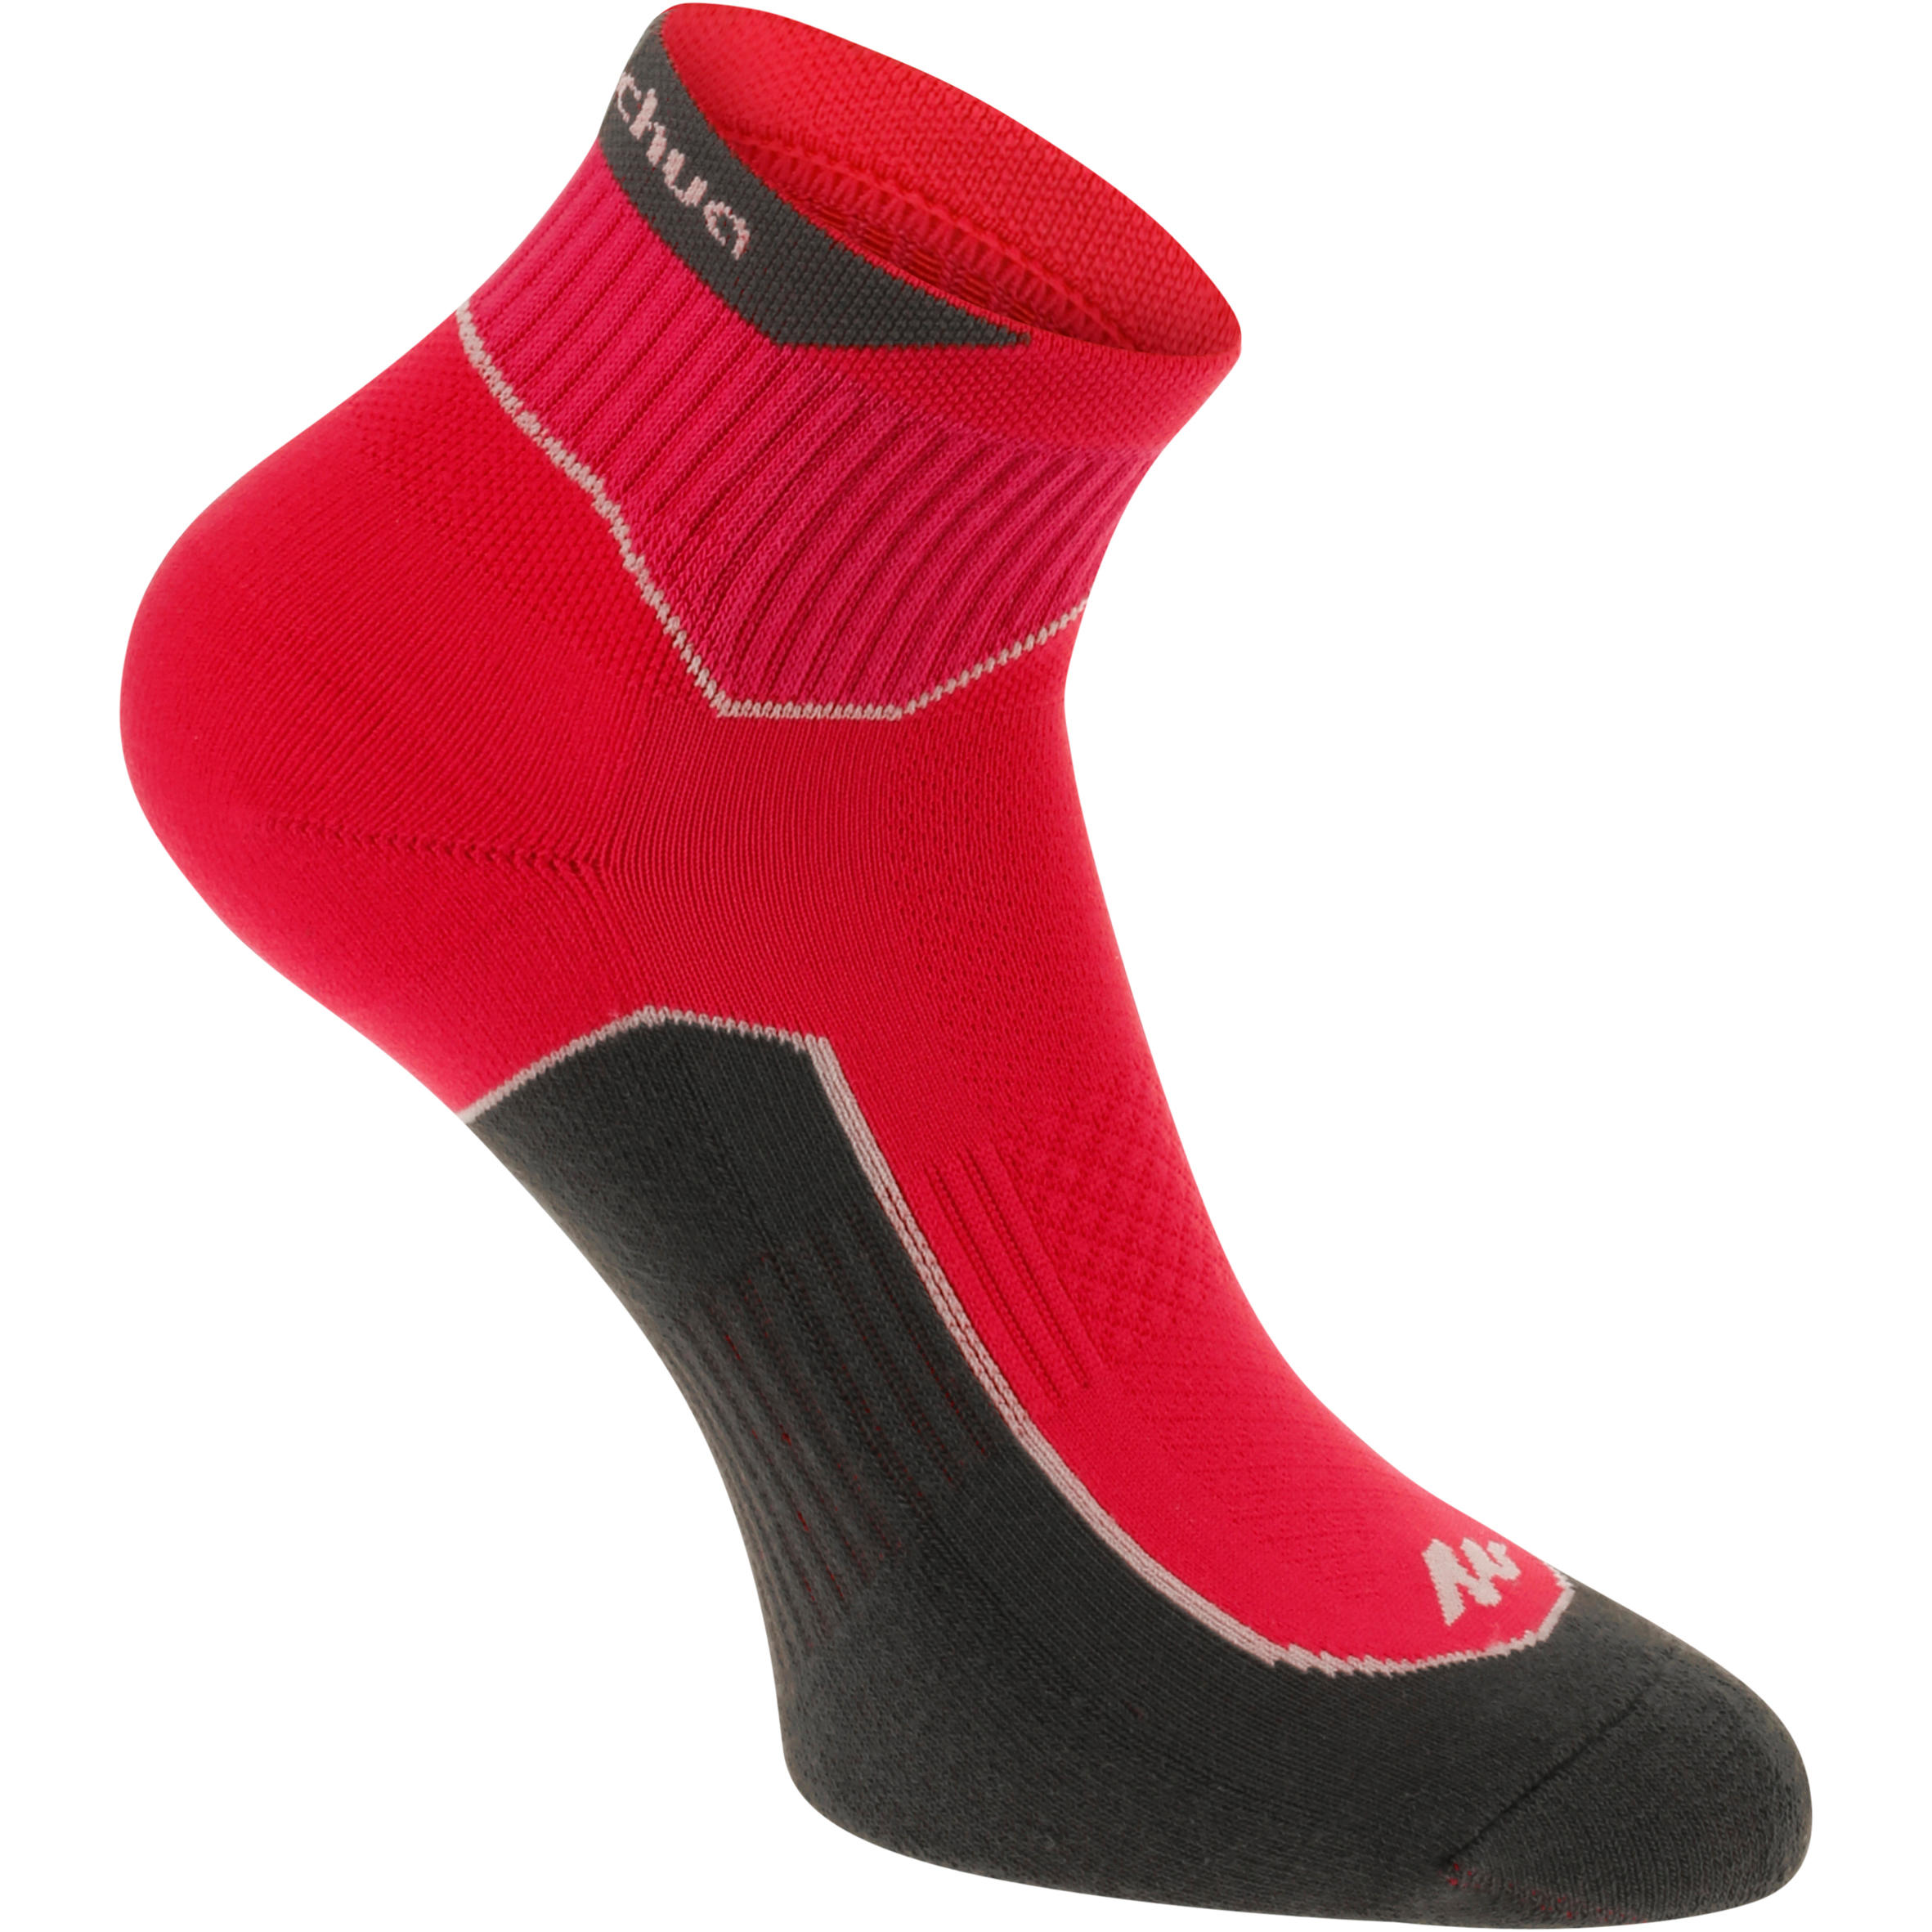 2 pairs of adult’s short Arpenaz 100 hiking socks in pink. 2/8